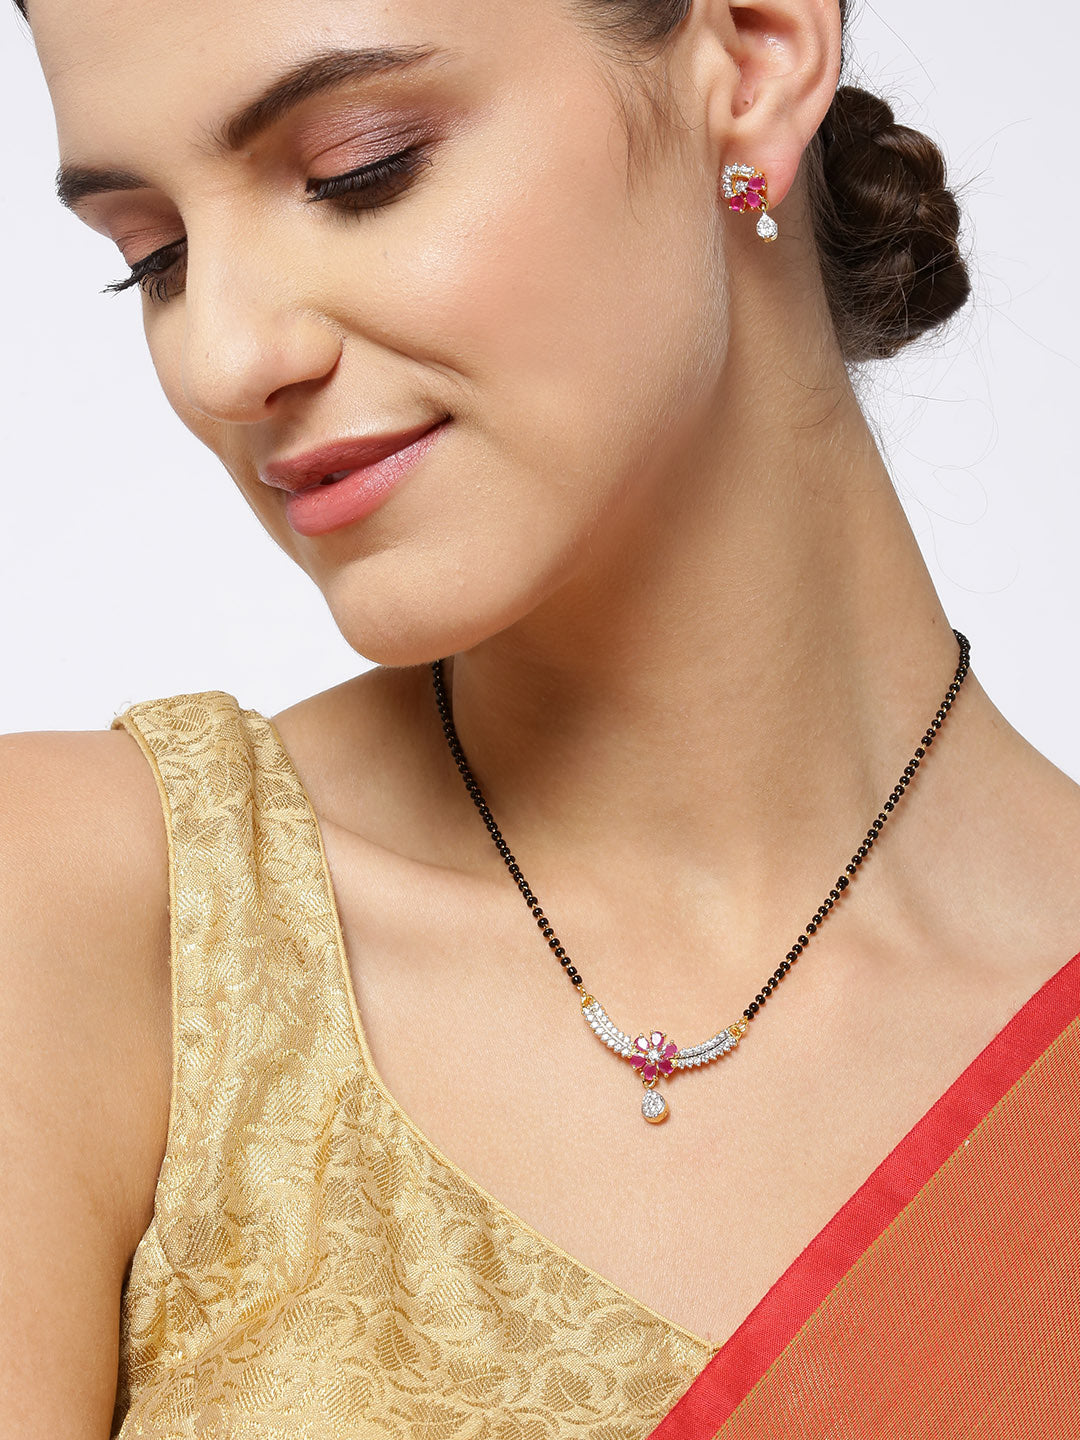 Gold-Plated American Diamond and Ruby Studded Floral Patterned Mangalsutra Set with Earrings